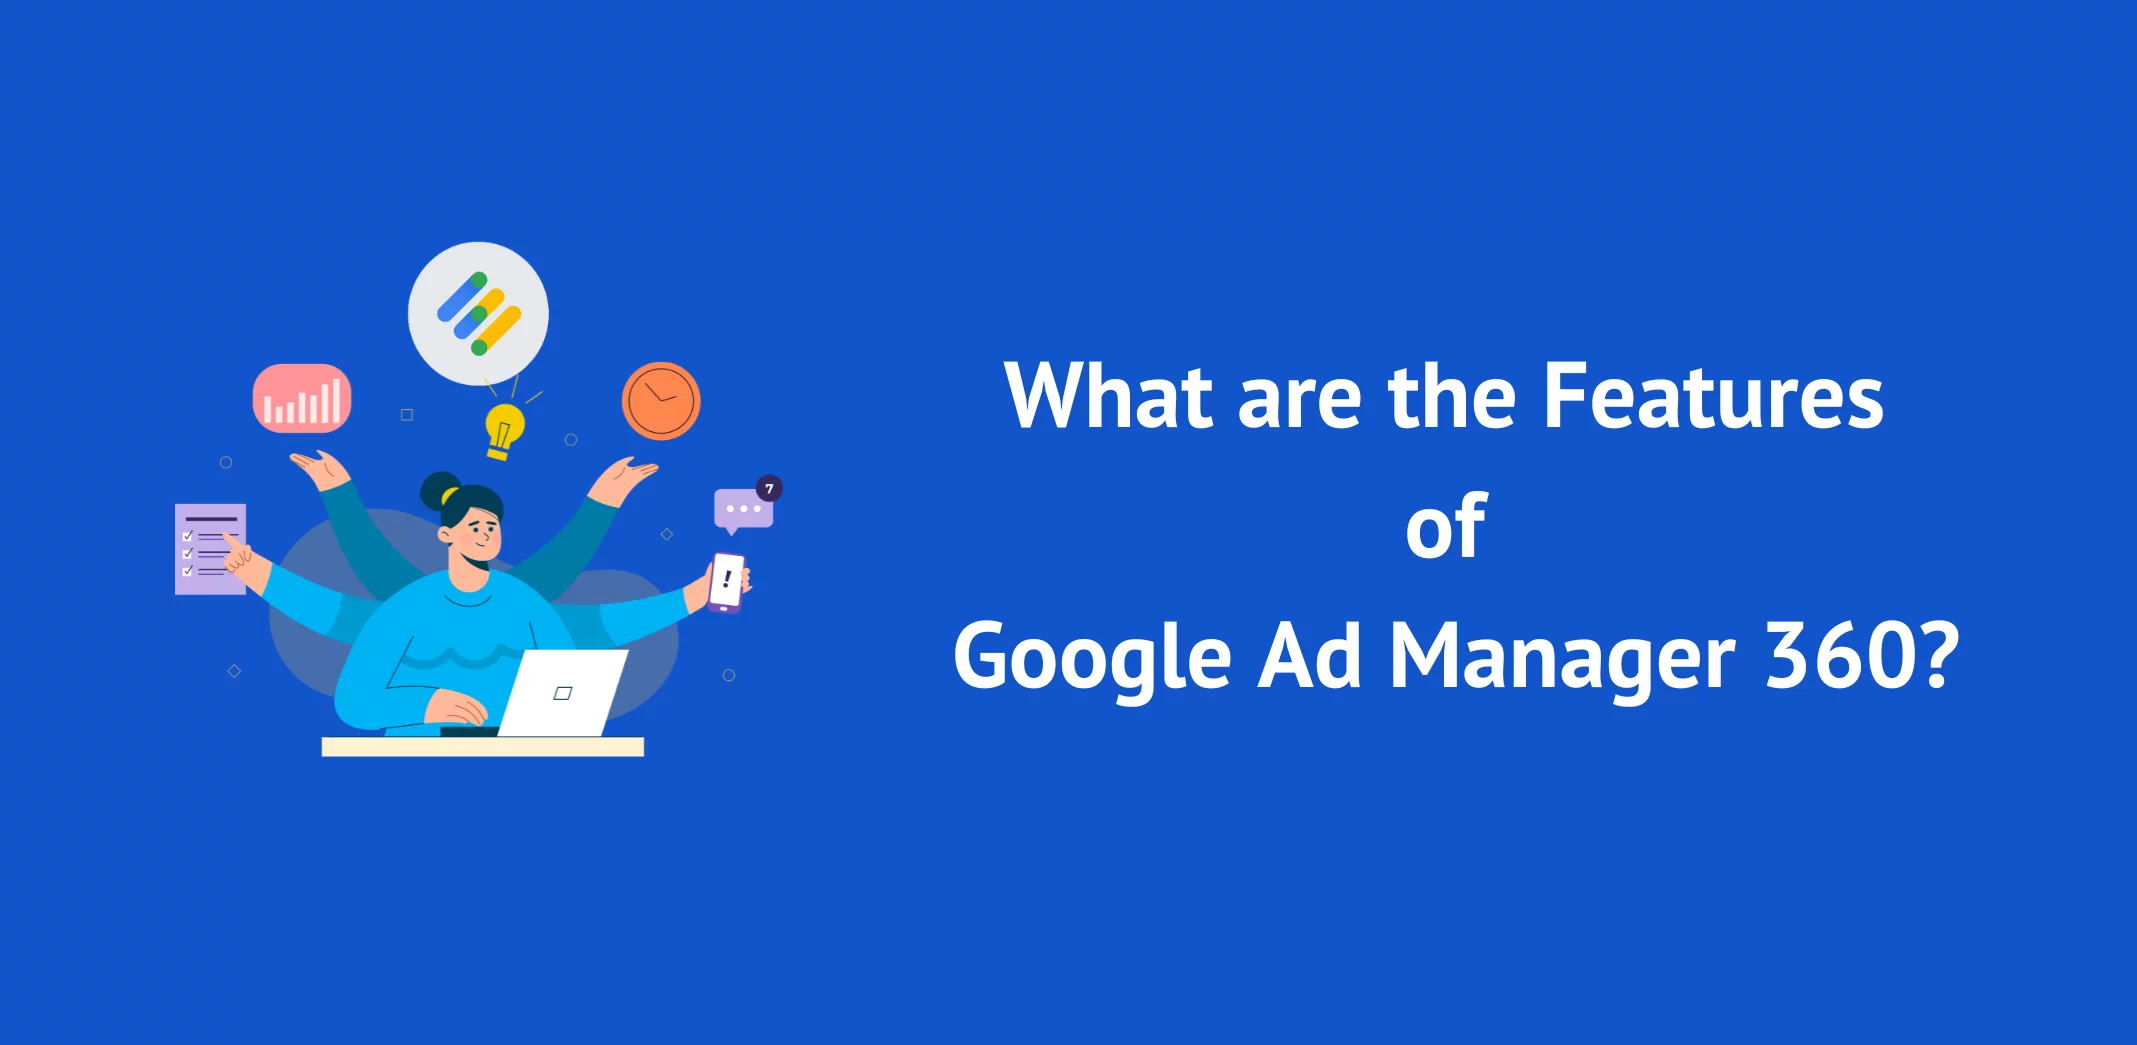 What are the Features of Google Ad Manager 360?